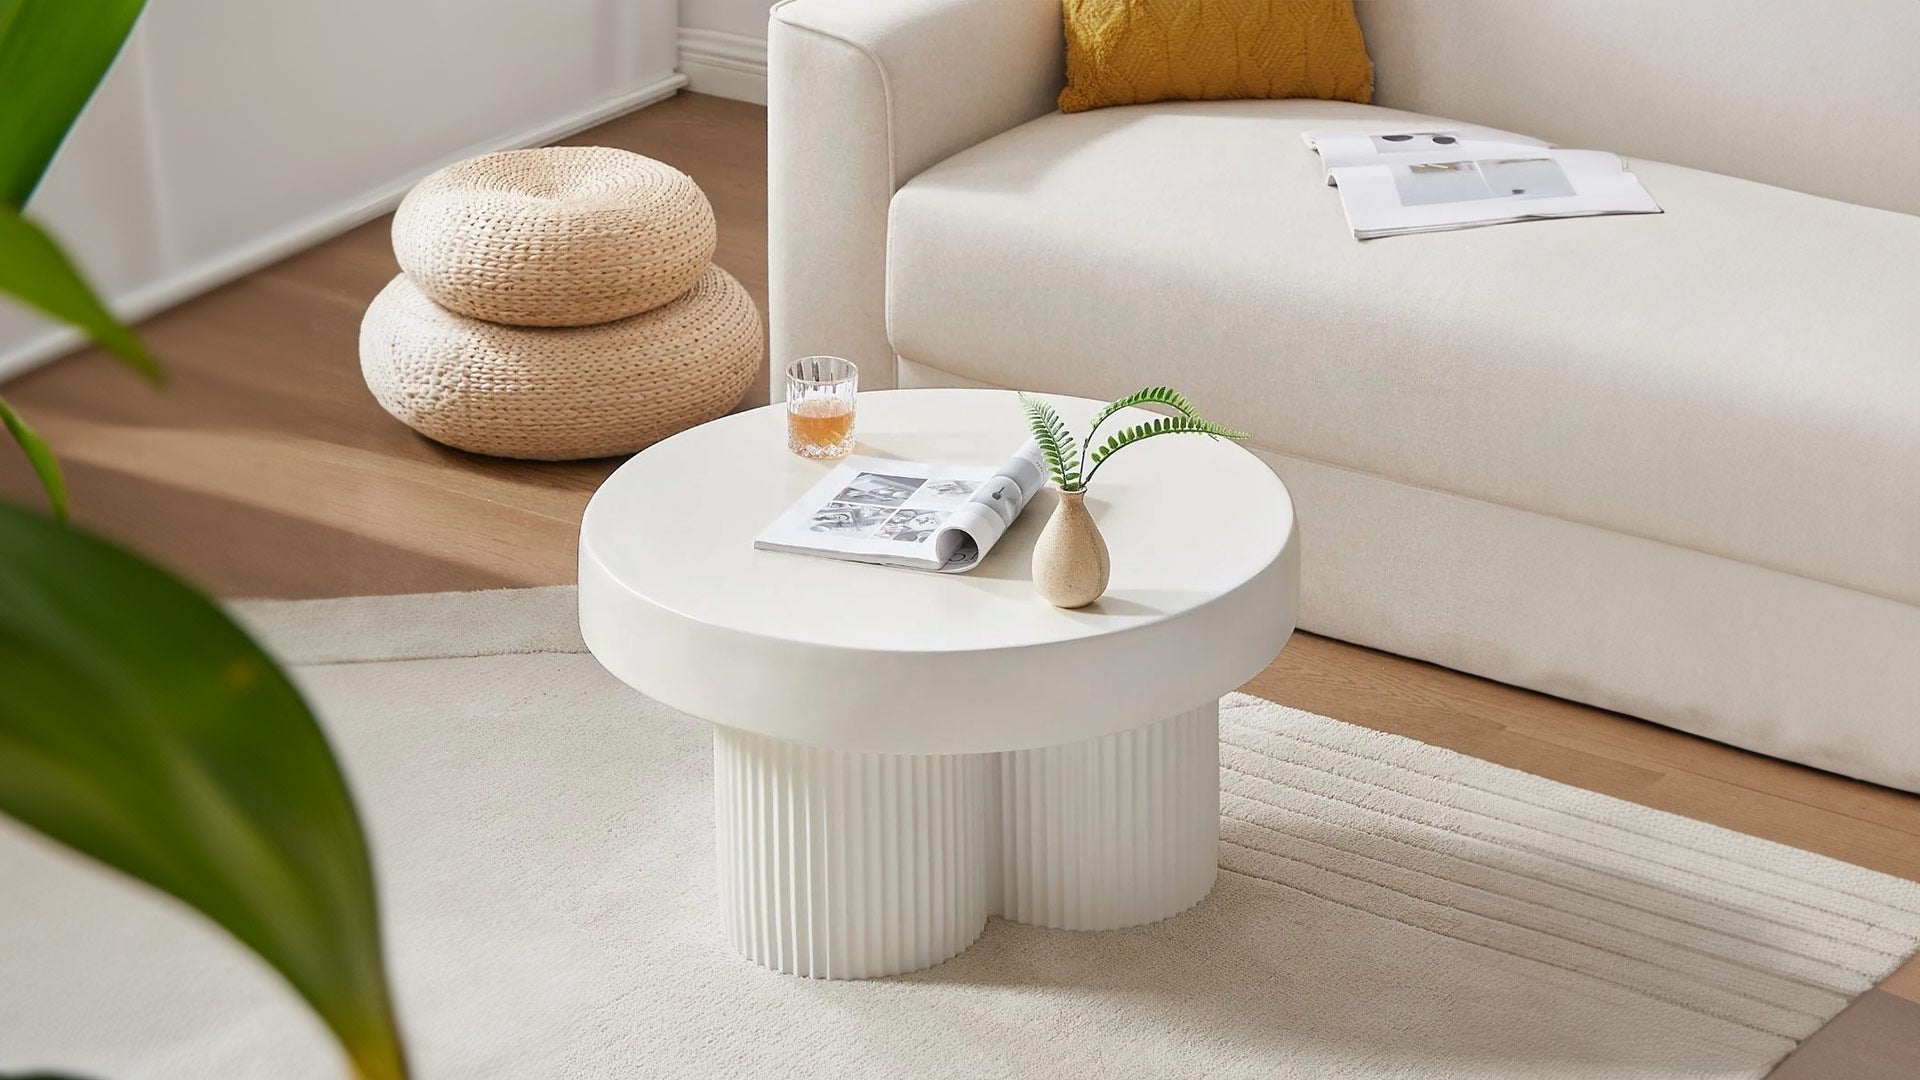 The Complete Guide to Styling and Selecting the Perfect Coffee Table